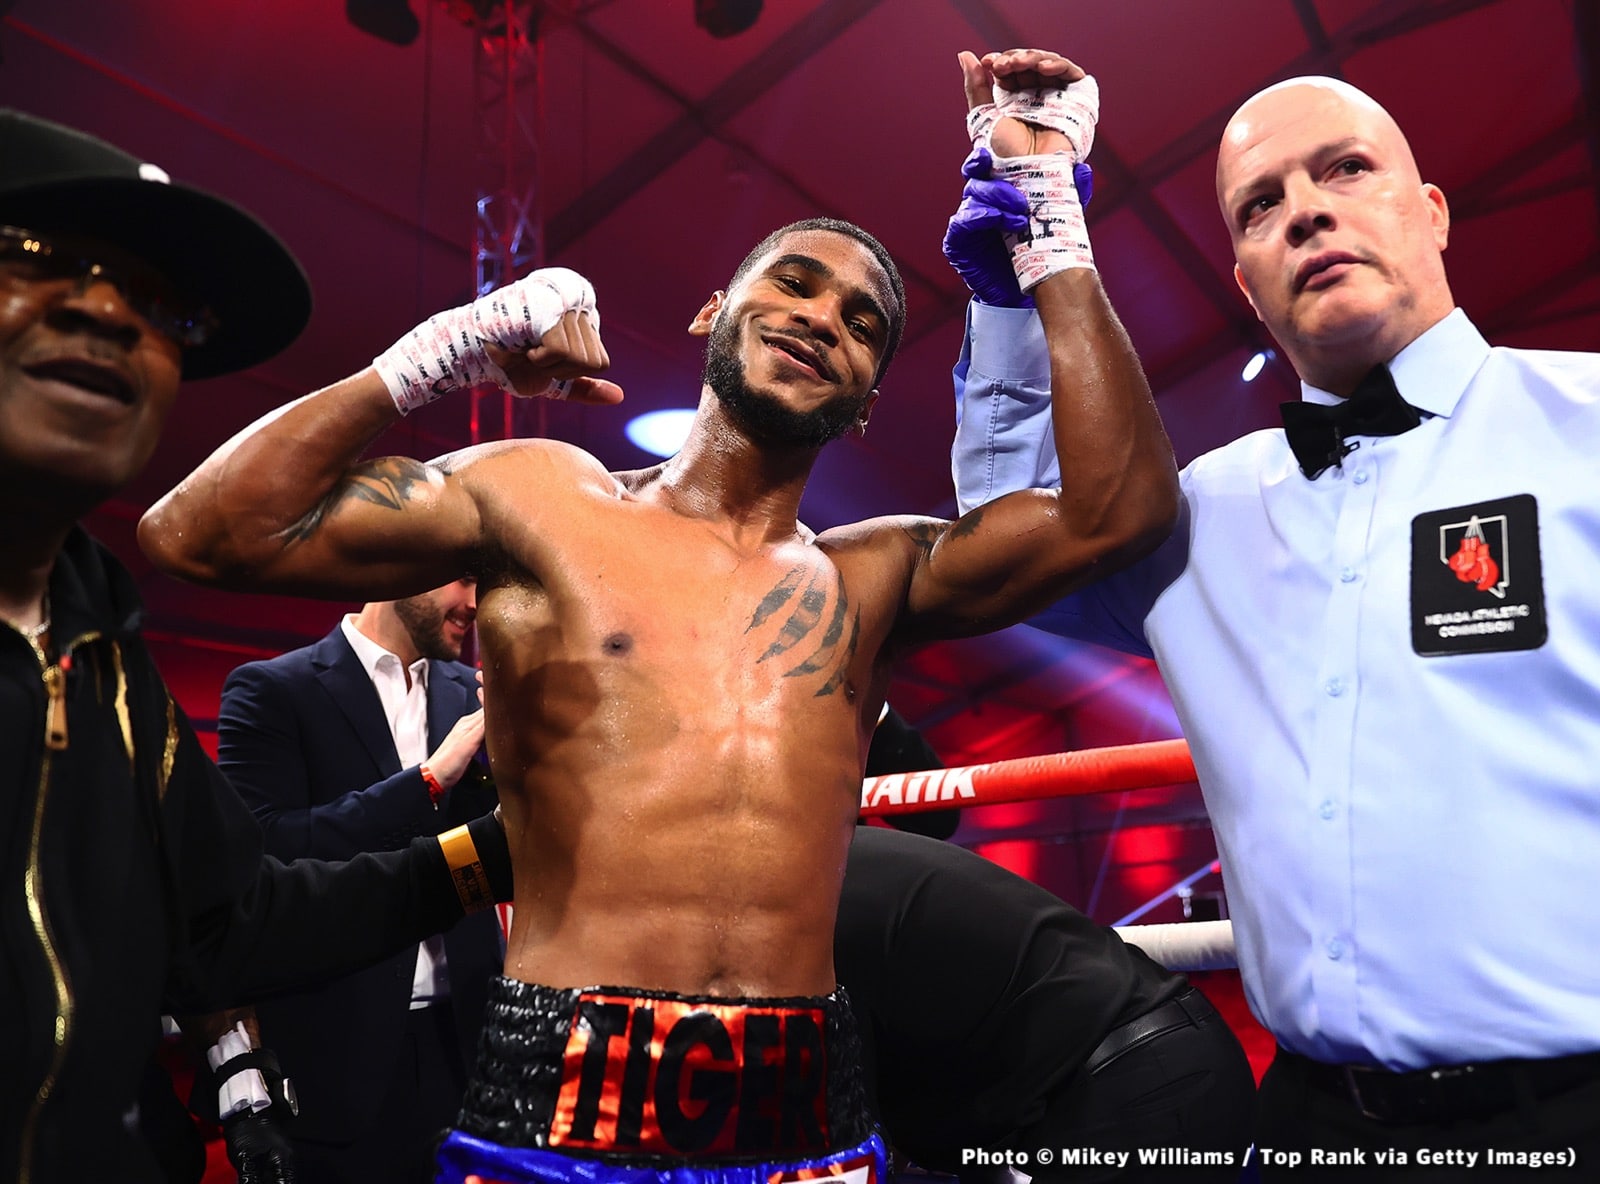 Janibek Alimkhanuly stops Danny Dignum by 2nd round KO - Boxing results